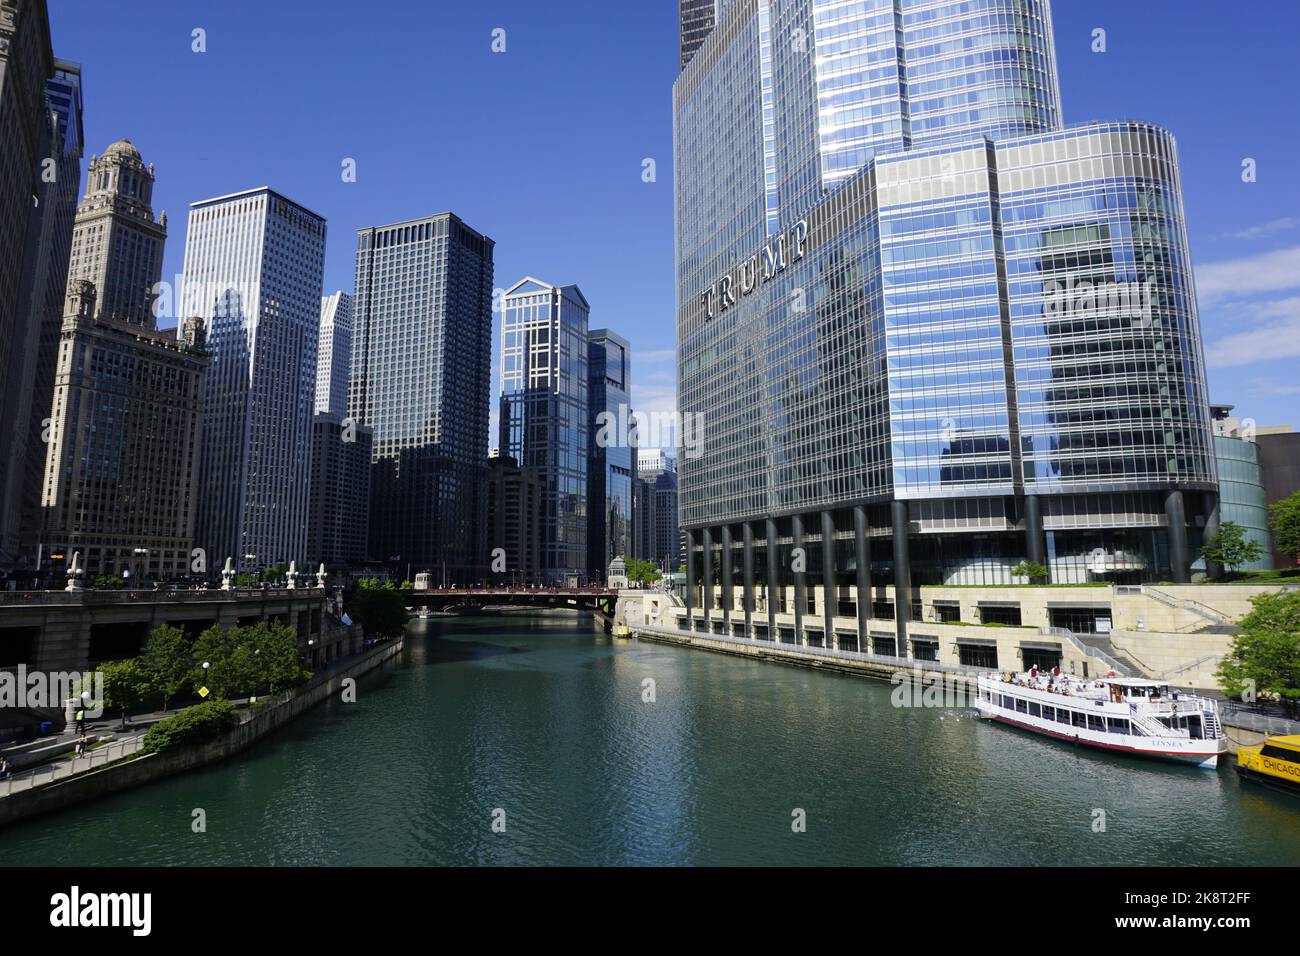 A beautiful shot of the Chicago River and nearby modern buildings from the Michigan Ave Bridge Stock Photo